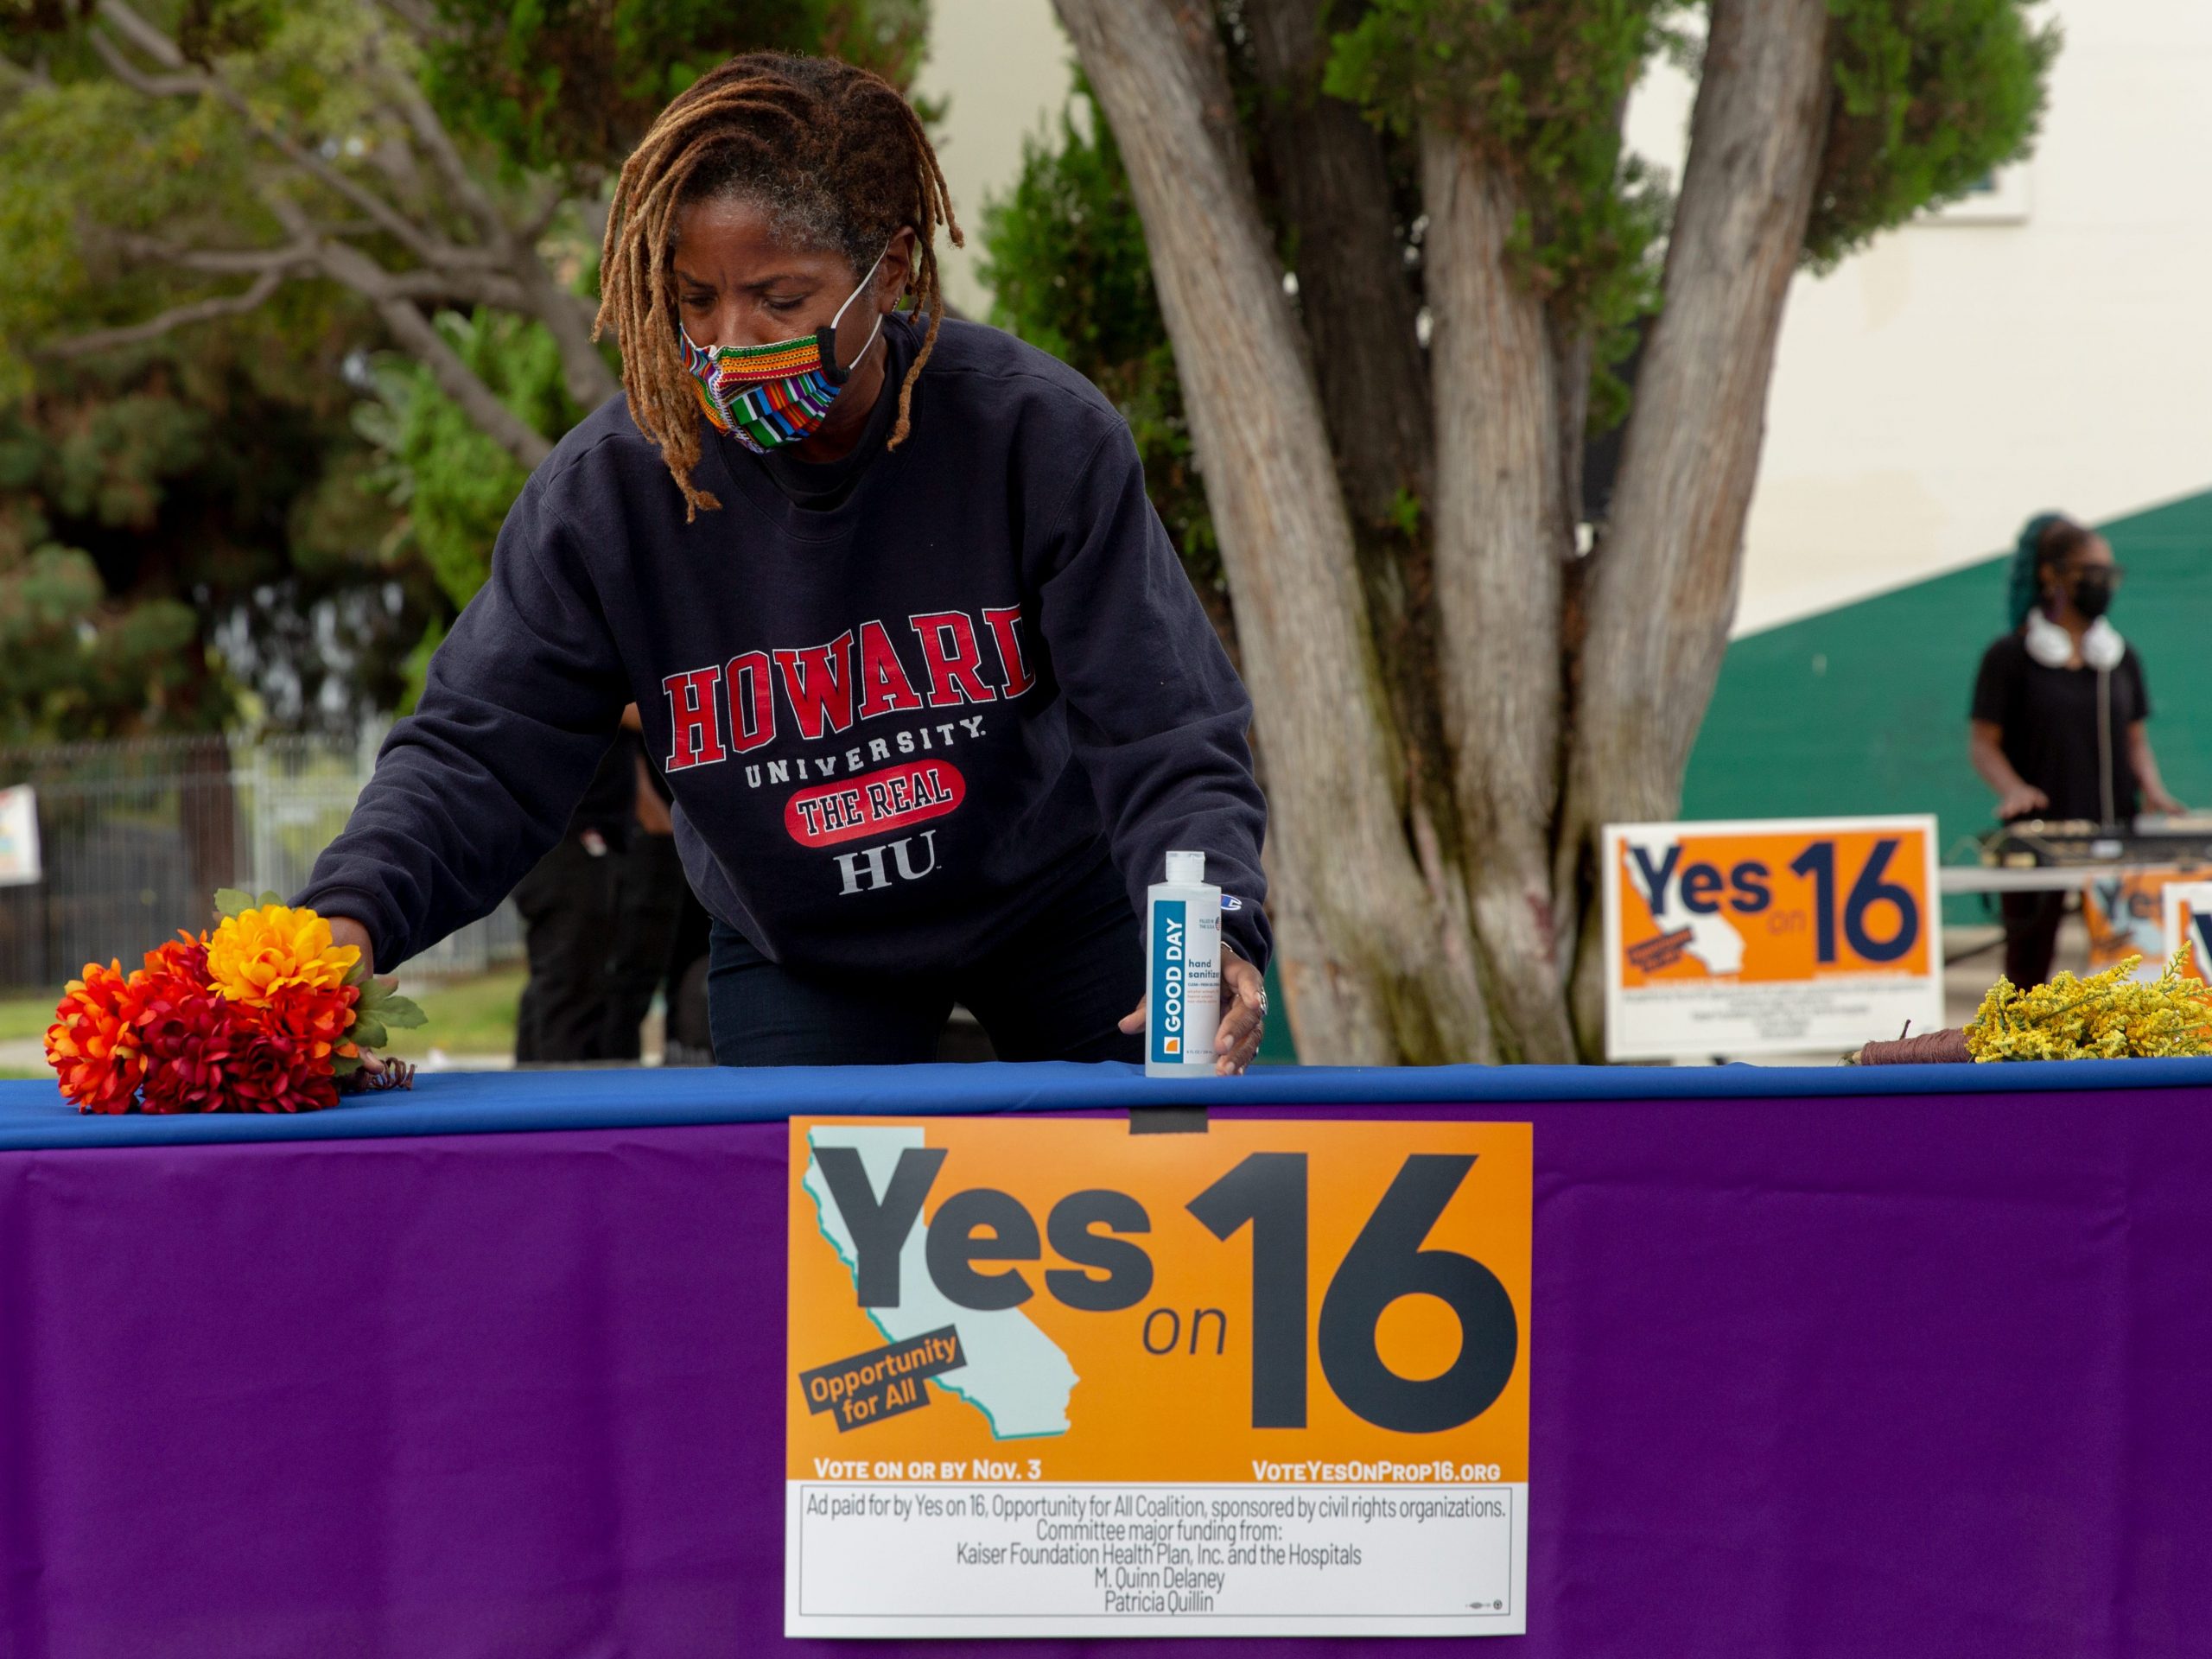 Proposition 16 supporters rally during early voting in California